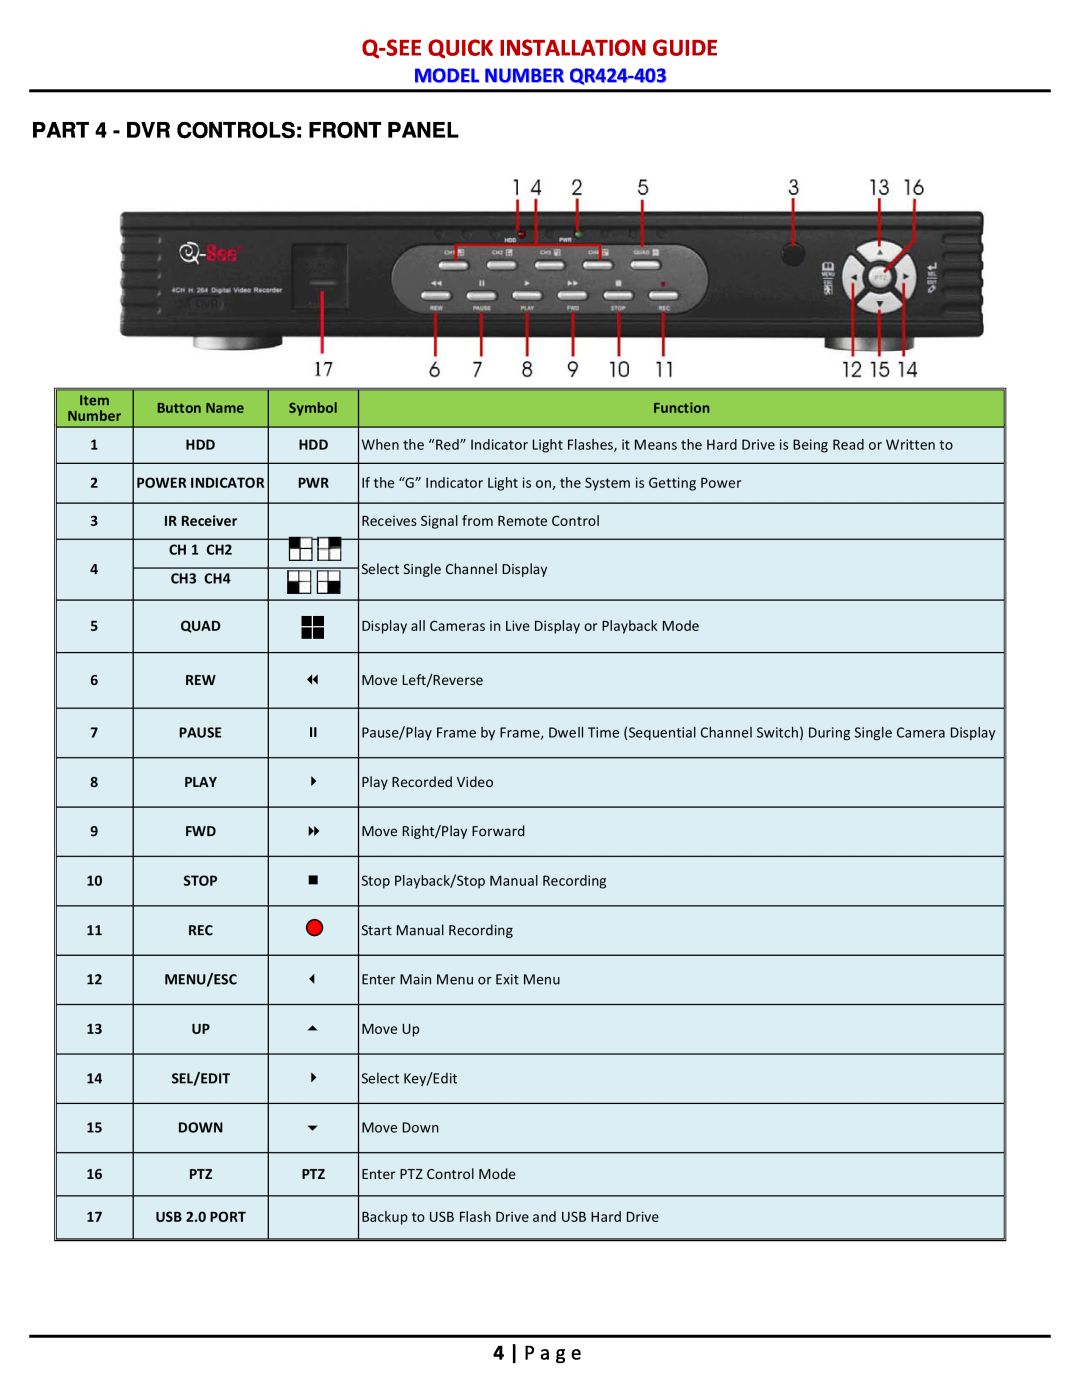 Q-See manual PART 4 - DVR CONTROLS FRONT PANEL, P a g e, Q-Seequick Installation Guide, MODEL NUMBER QR424-403 